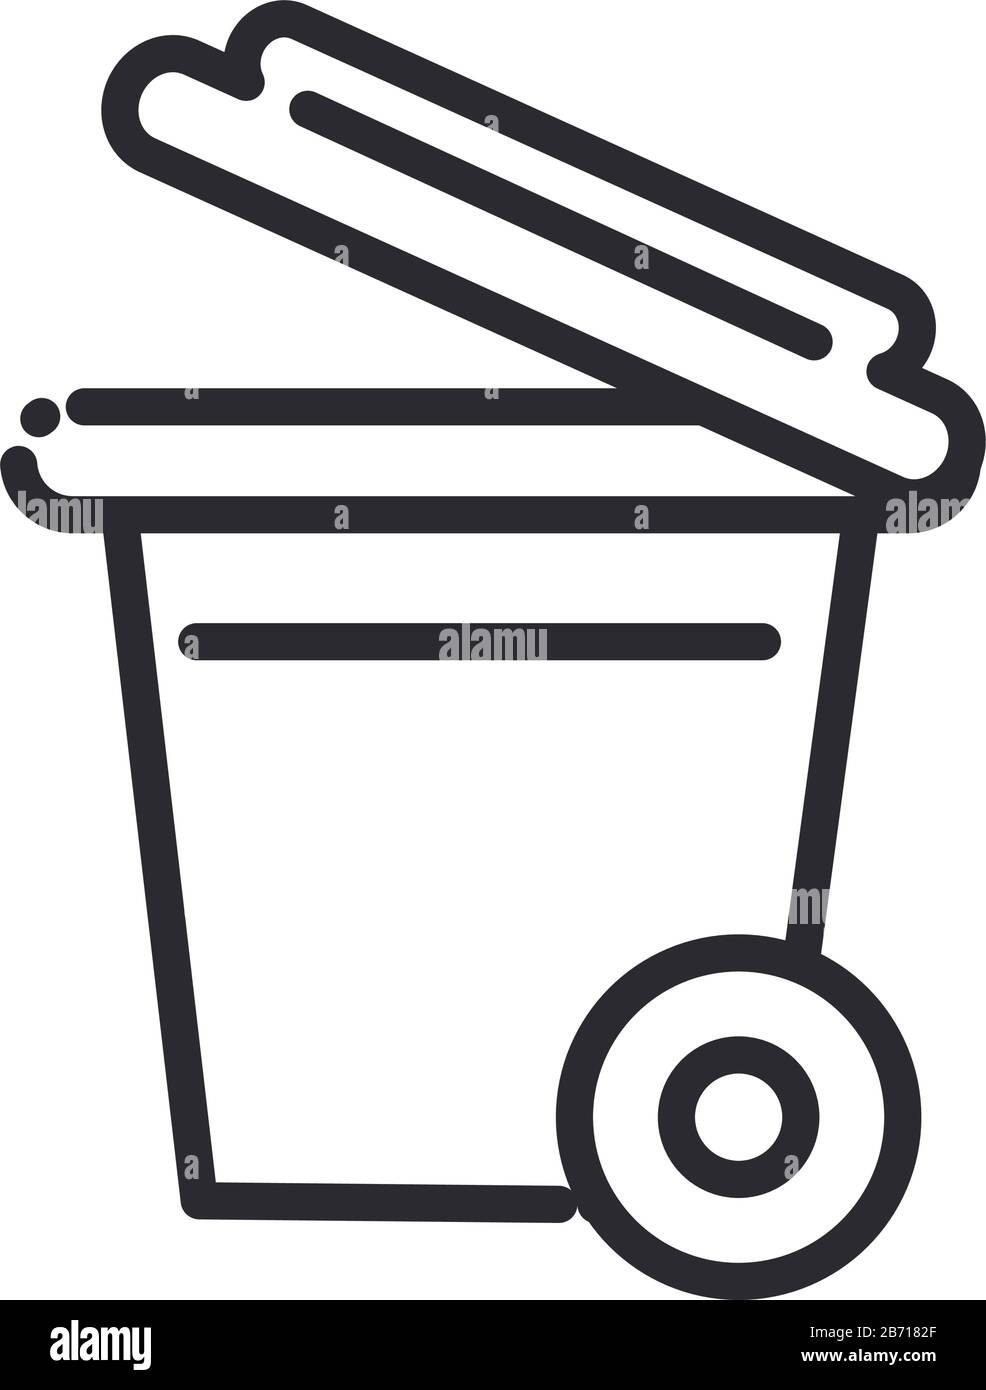 rolling trash can clipart